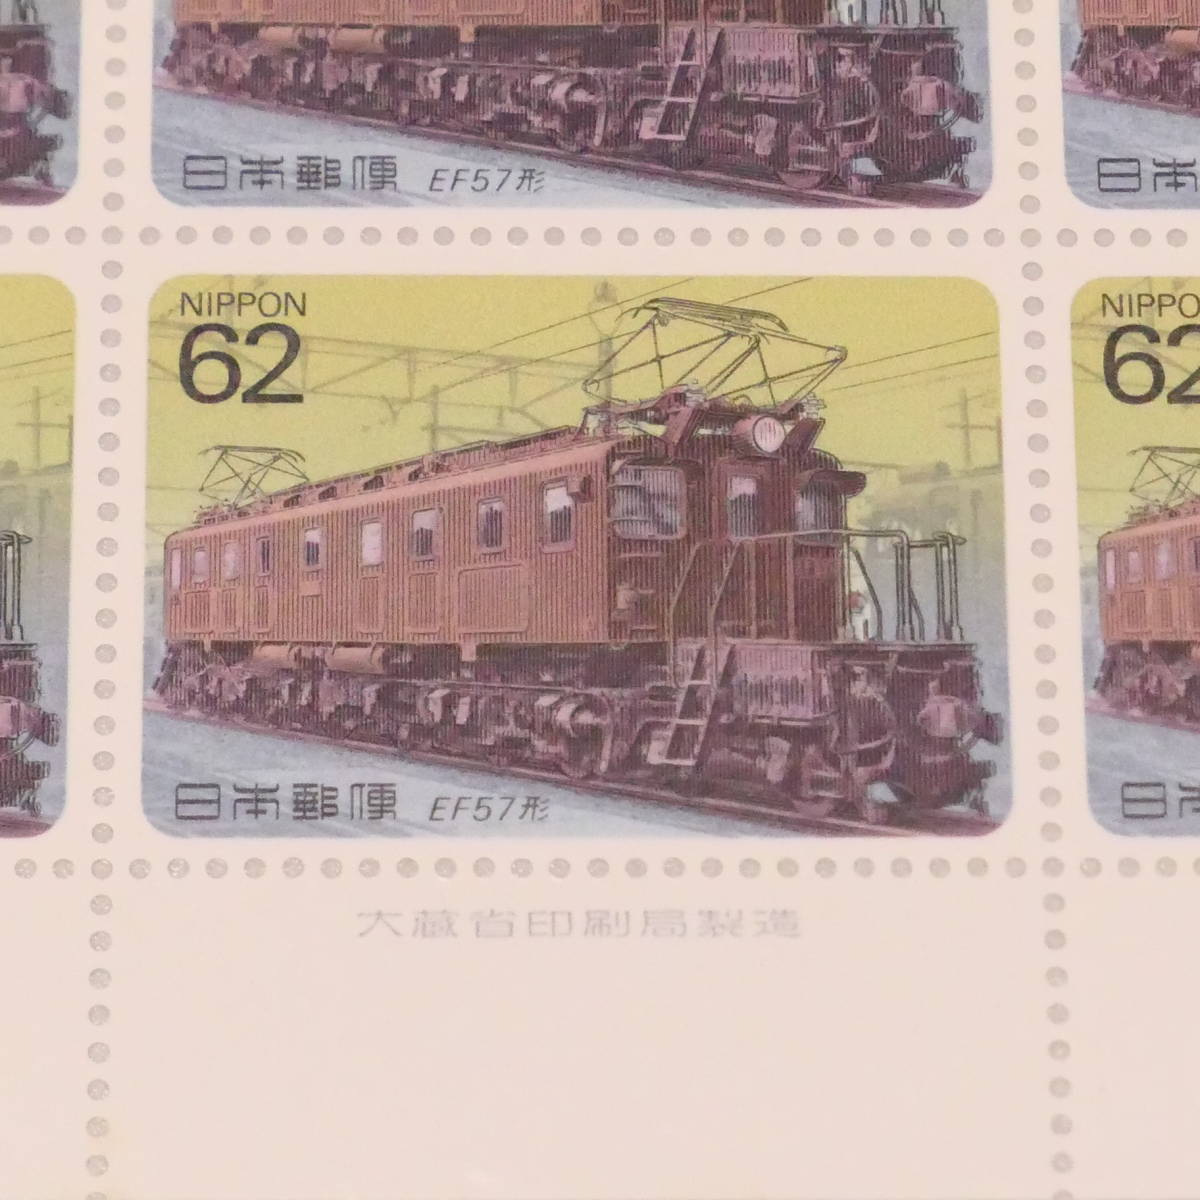  stamp 1990 year Heisei era 02 year 07 month 18 day electric locomotive series no. 5 compilation EF57 shape 62 jpy 20 sheets 1 seat 